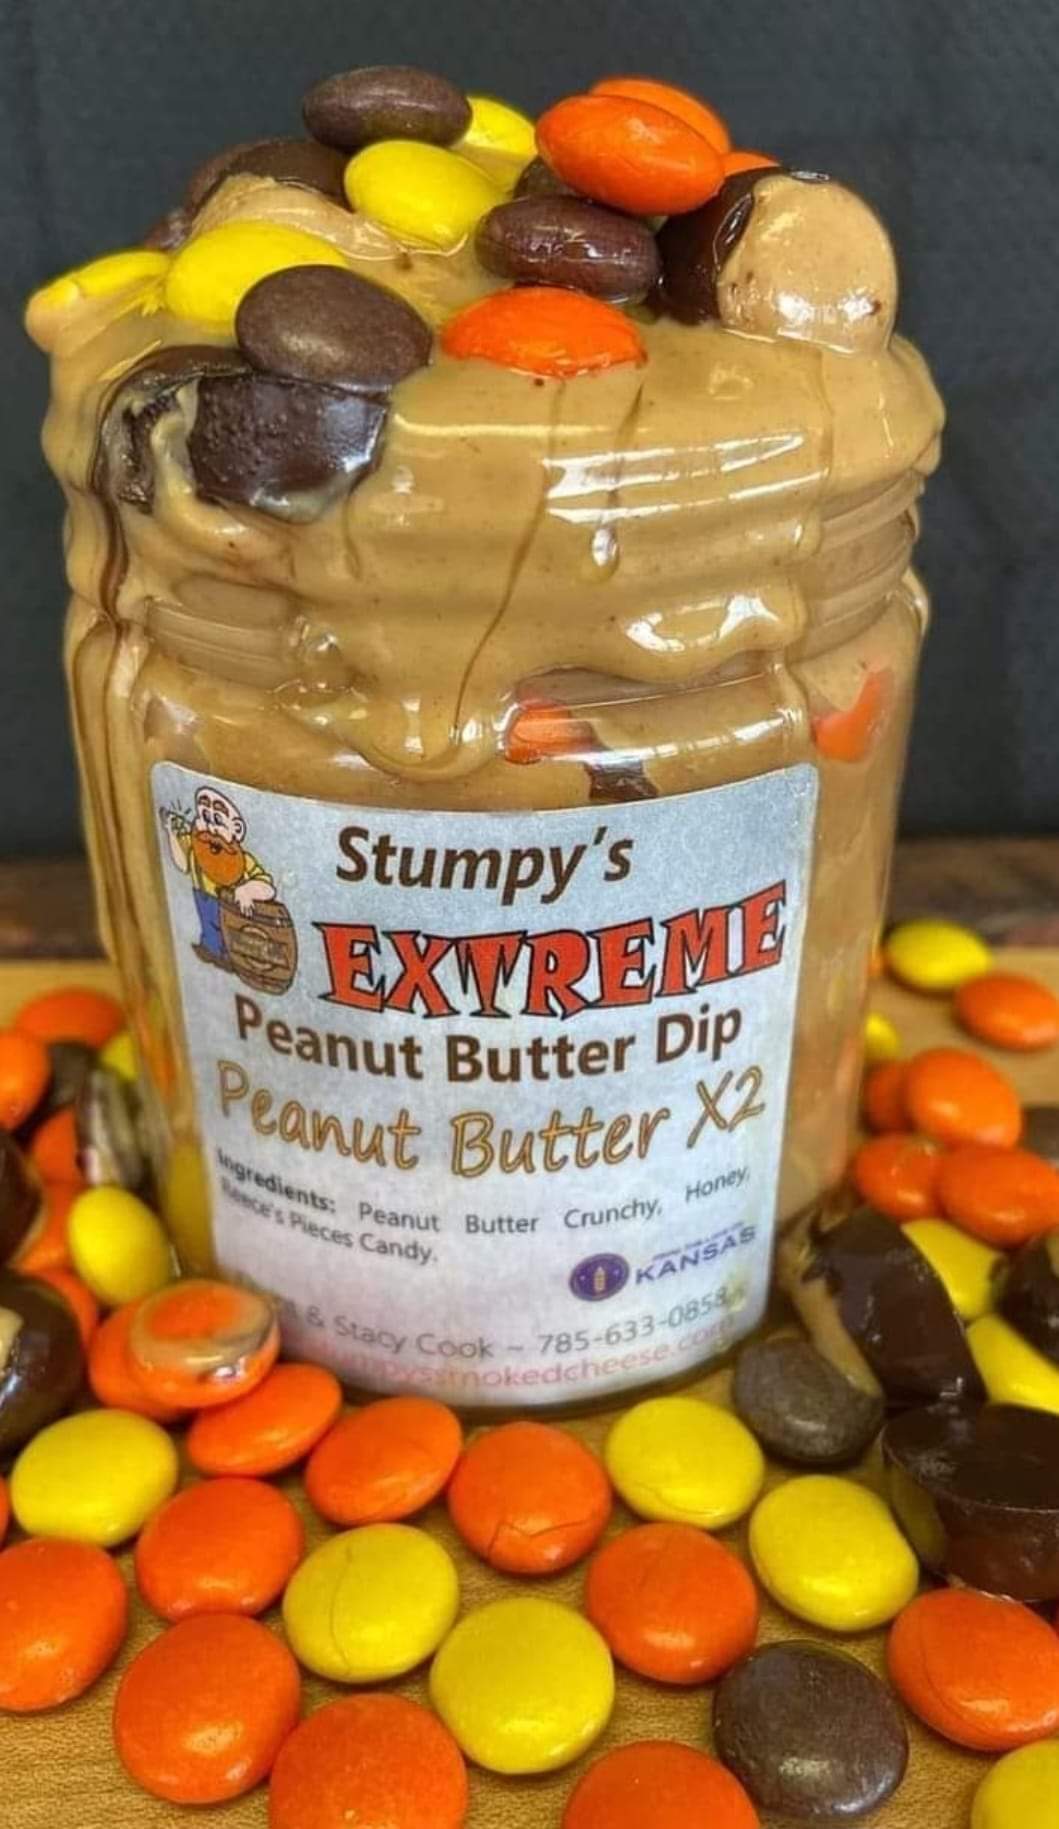 Product Image of Peanut Butter X2 Extreme Peanut Butter Dip (8oz)